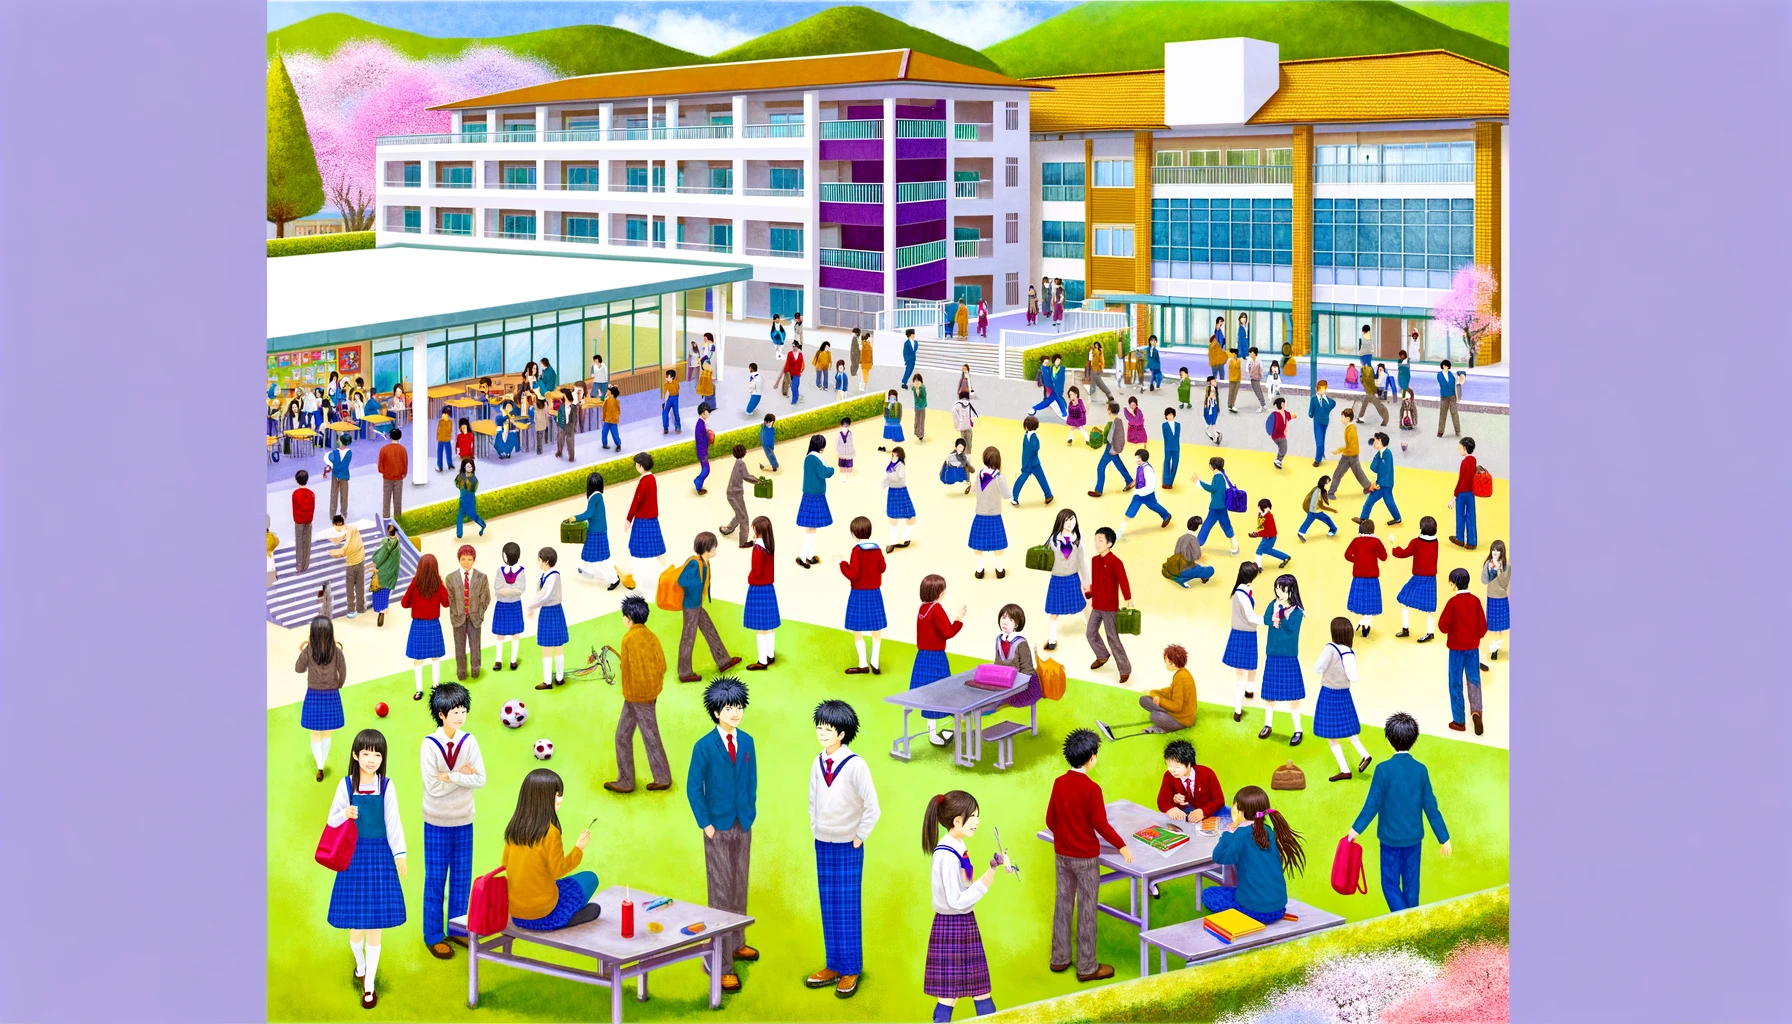 A vibrant high school campus scene showing the popularity of Urawai High School in Japan. The image features a diverse group of students of various Asian descents, wearing colorful school uniforms, engaged in various outdoor activities. Students are depicted socializing, studying, and participating in sports on a spacious campus with a mix of modern and traditional architectural styles. The campus is lush with greenery and cherry trees in bloom, adding to the lively atmosphere. The scene is bustling, portraying a well-liked and active school environment.